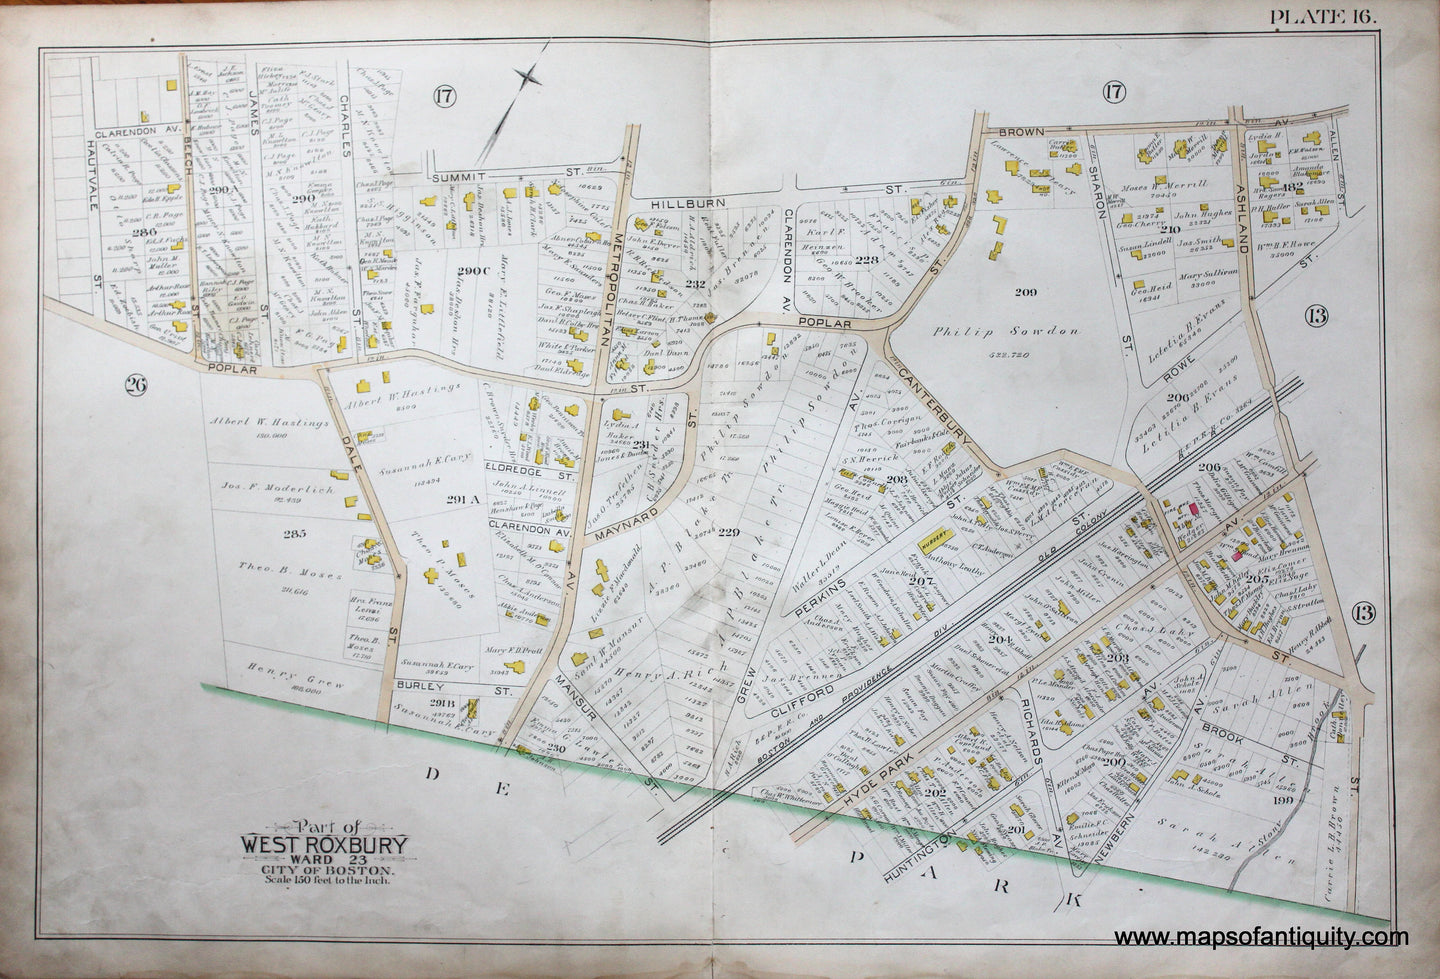 Genuine-Antique-Map-Plate-16-Part-of-West-Roxbury-City-of-Boston-1890-Bromley-Maps-Of-Antiquity